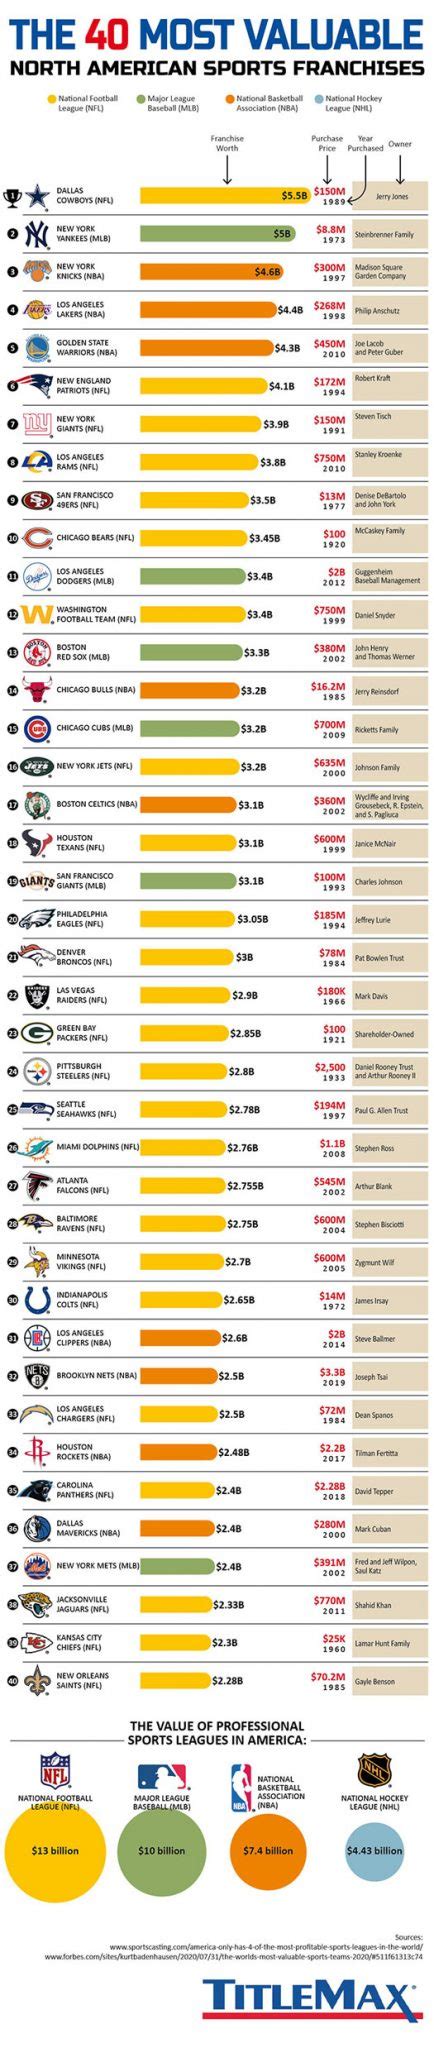 40 Most Valuable North American Sports Franchises Best Infographics